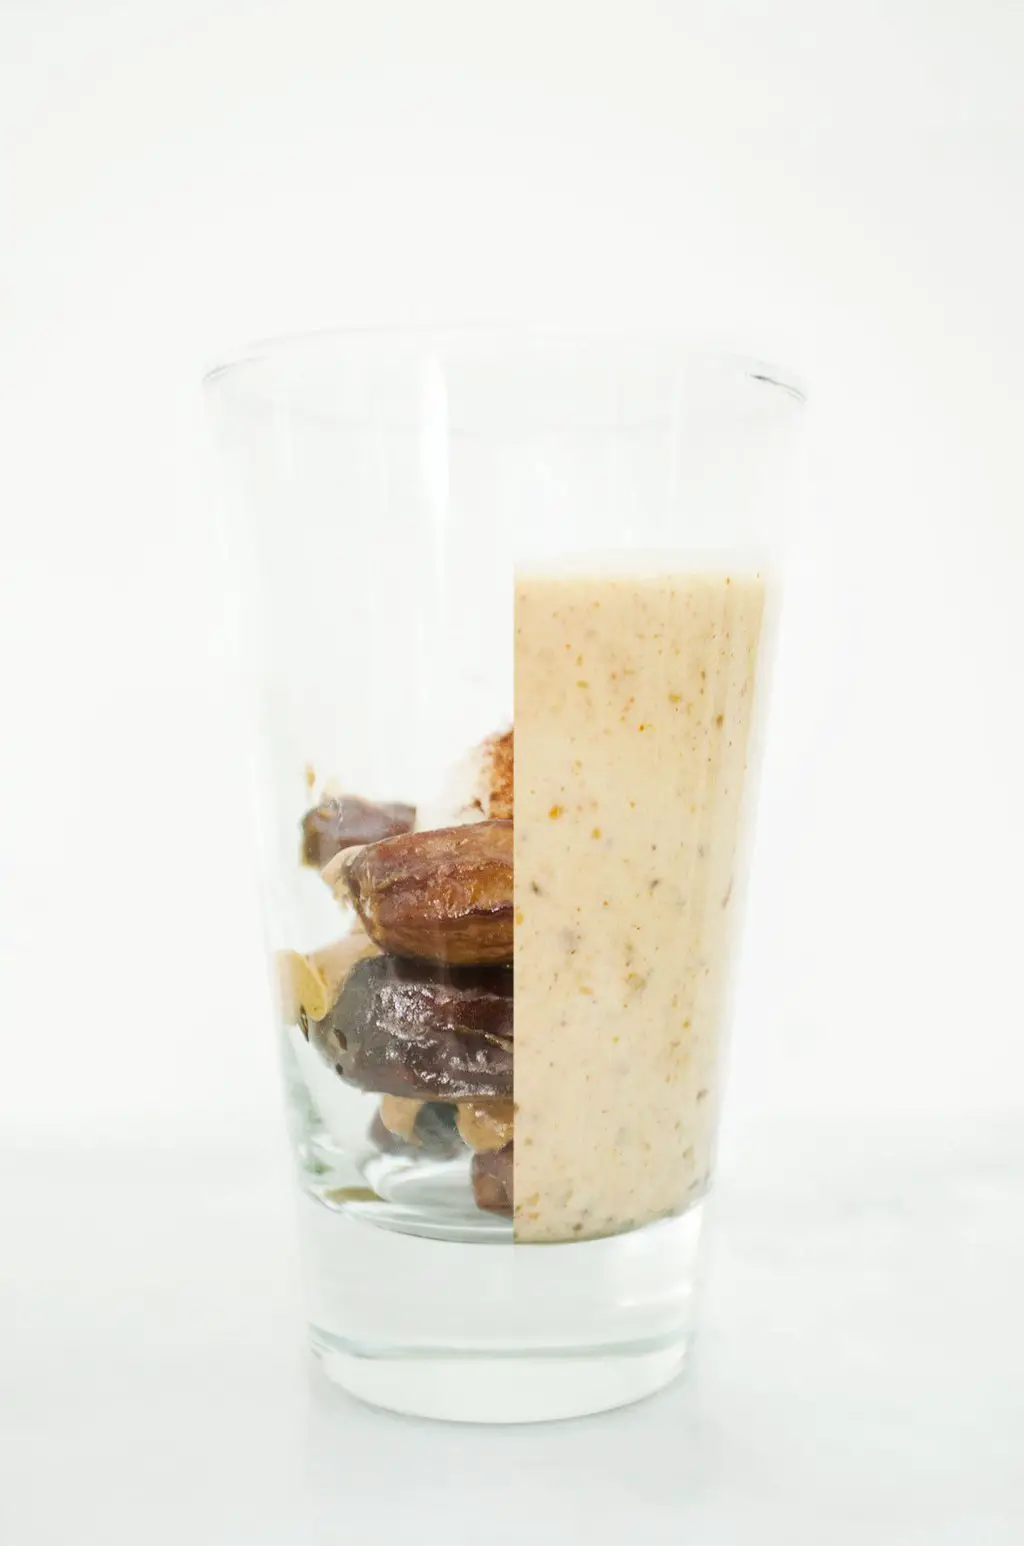 Creamy almond smoothie with dates, almond butter, coconut butter, cinnamon, and Truvia nectar via @thouswellblog